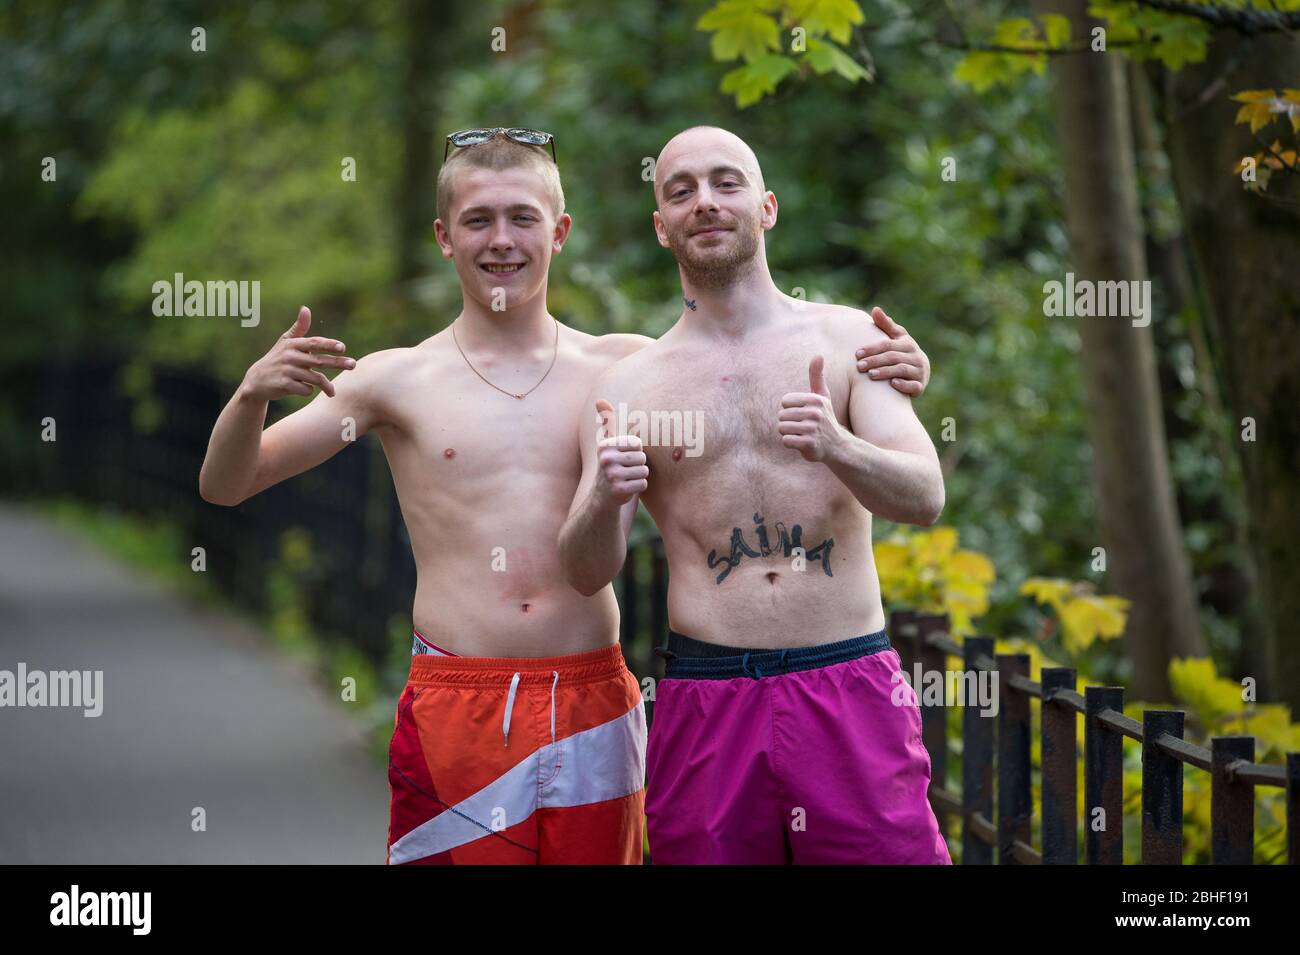 Glasgow, UK. 25th Apr, 2020. Pictured: (left-right) Keiran Macginley & Keir Fox, enjoying the sunshine in the park. As the saying goes in Glasgow if the sun is out it's “taps aff” weather. Scenes from the first weekend of the extended lockdown from KelvinGrove Park in Glasgow's West End during a very hot and sunny Saturday. Credit: Colin Fisher/Alamy Live News Stock Photo